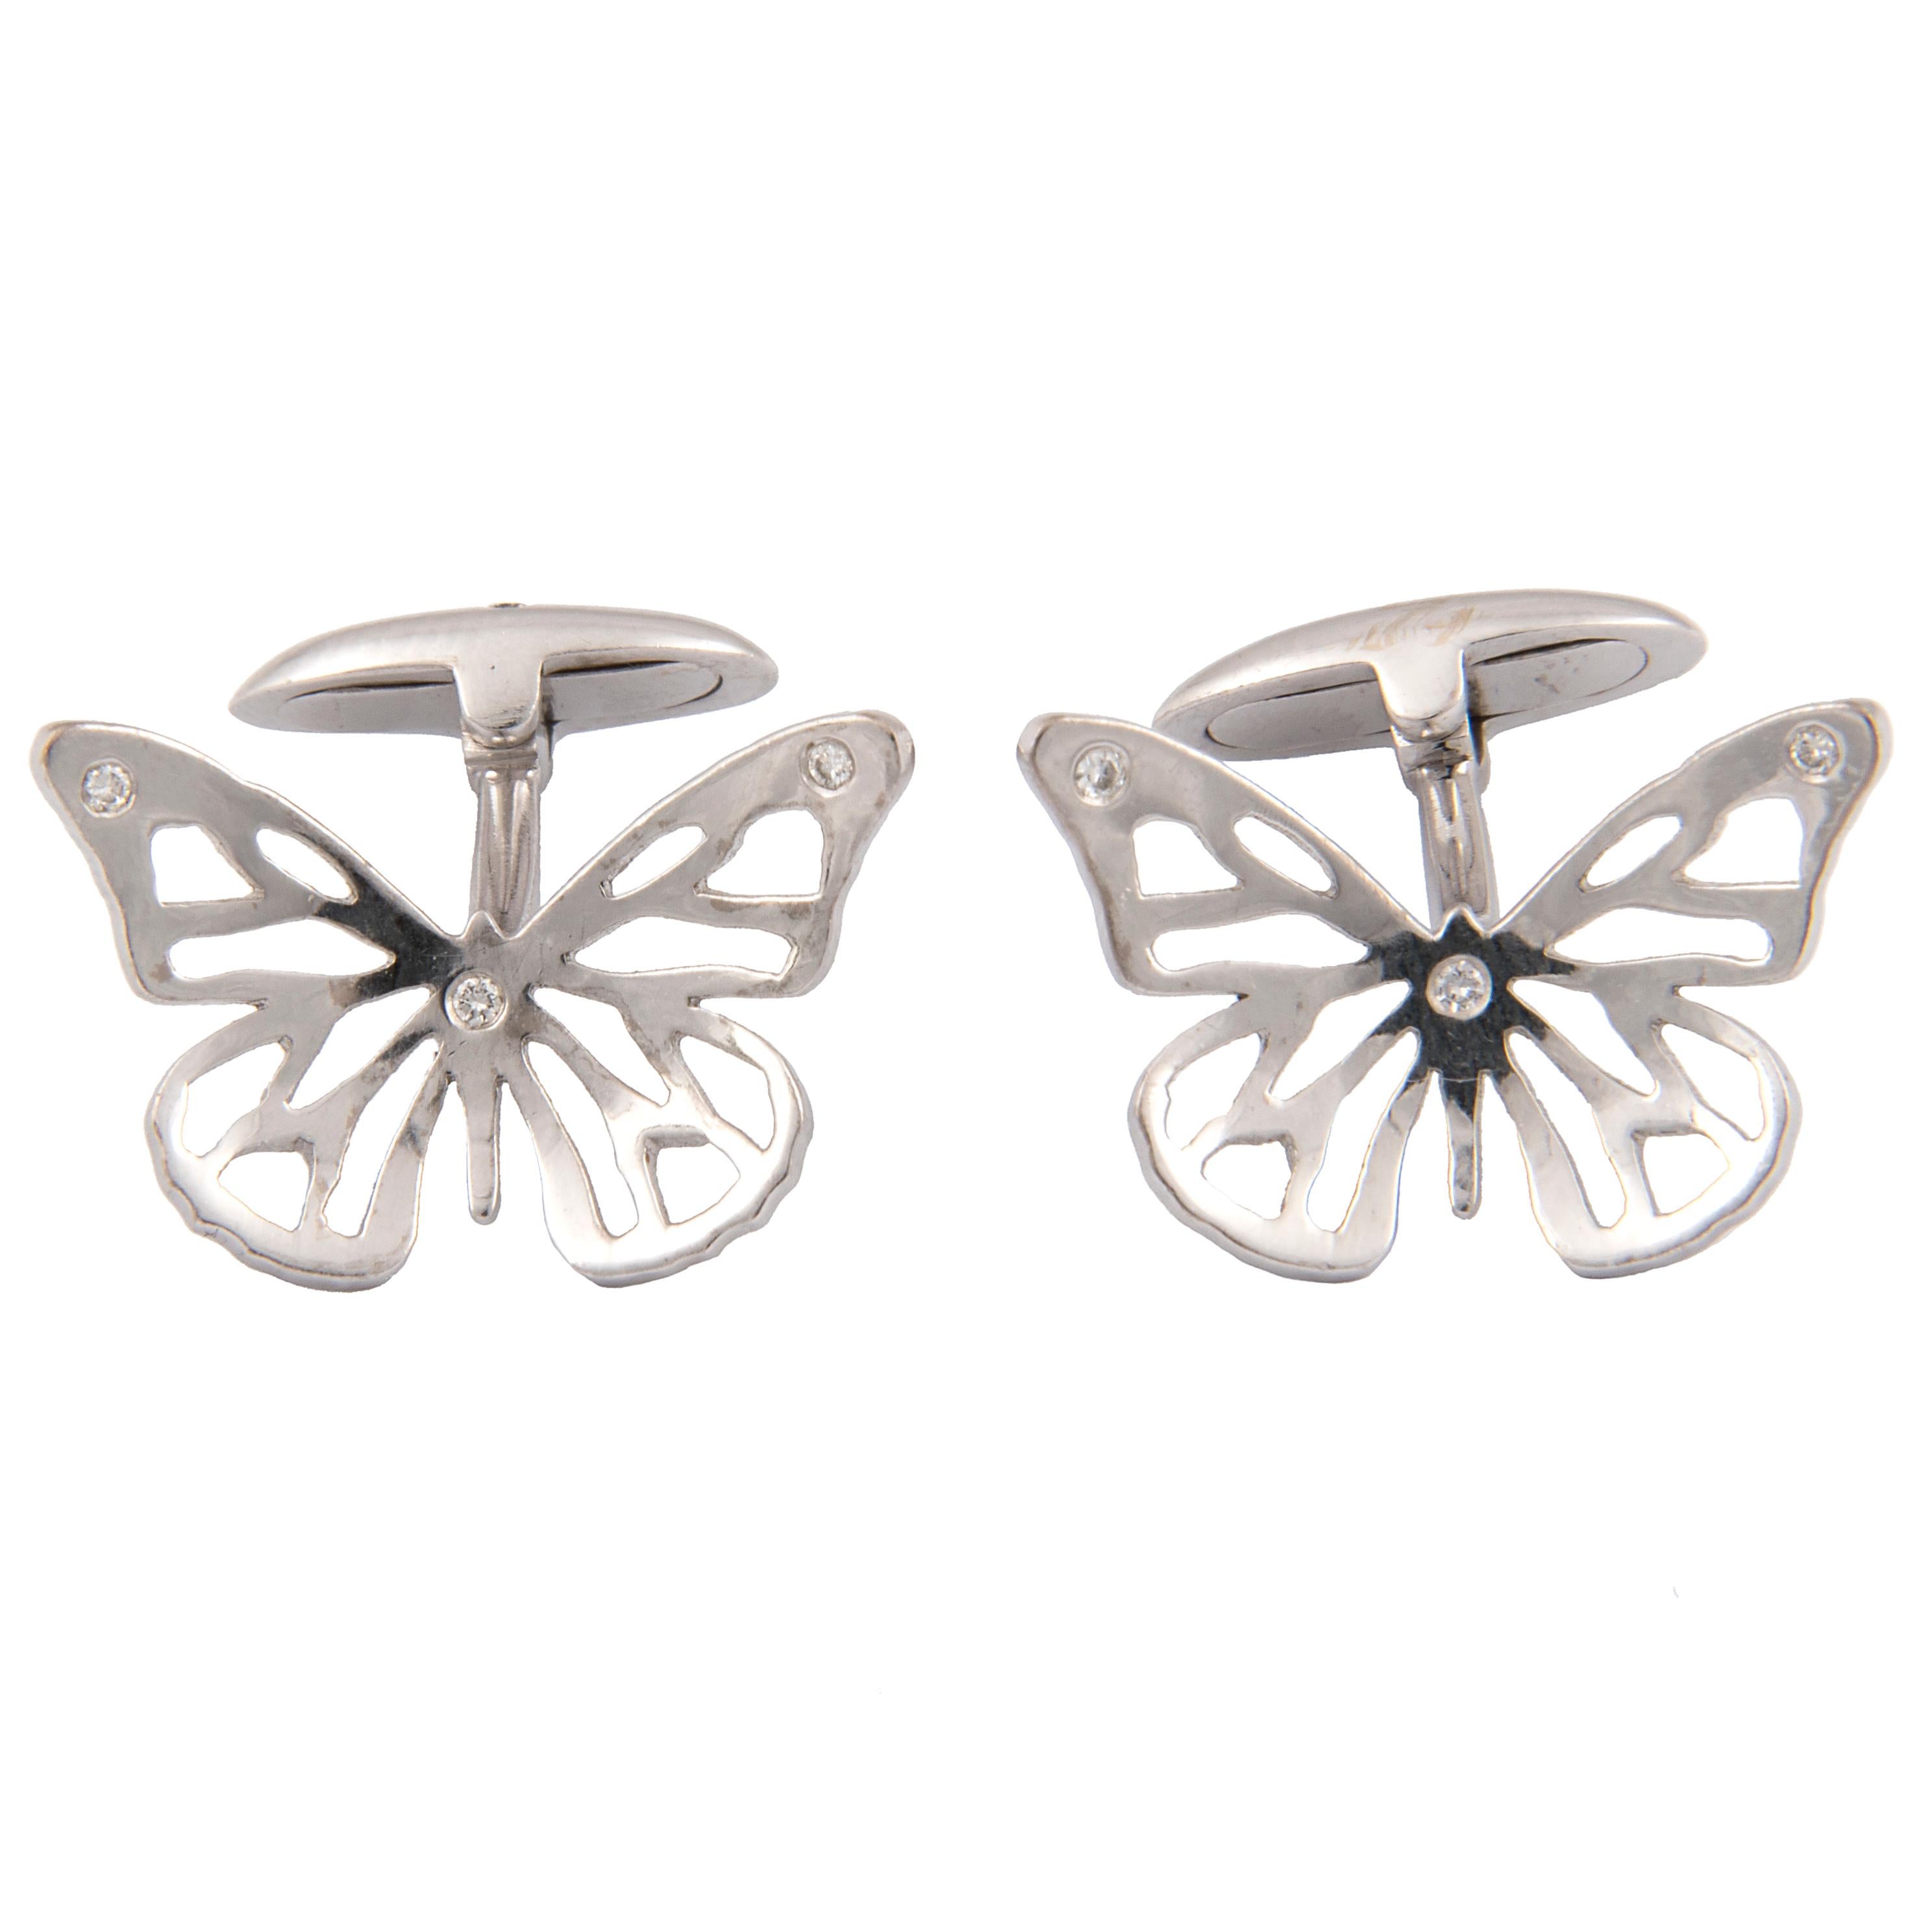 Pair of cufflinks by Florence Larochas, designed as 18k white gold butterflies set with diamonds
Signed F. Larochas Paris, French hallmark
Limited edition
Circa 2000